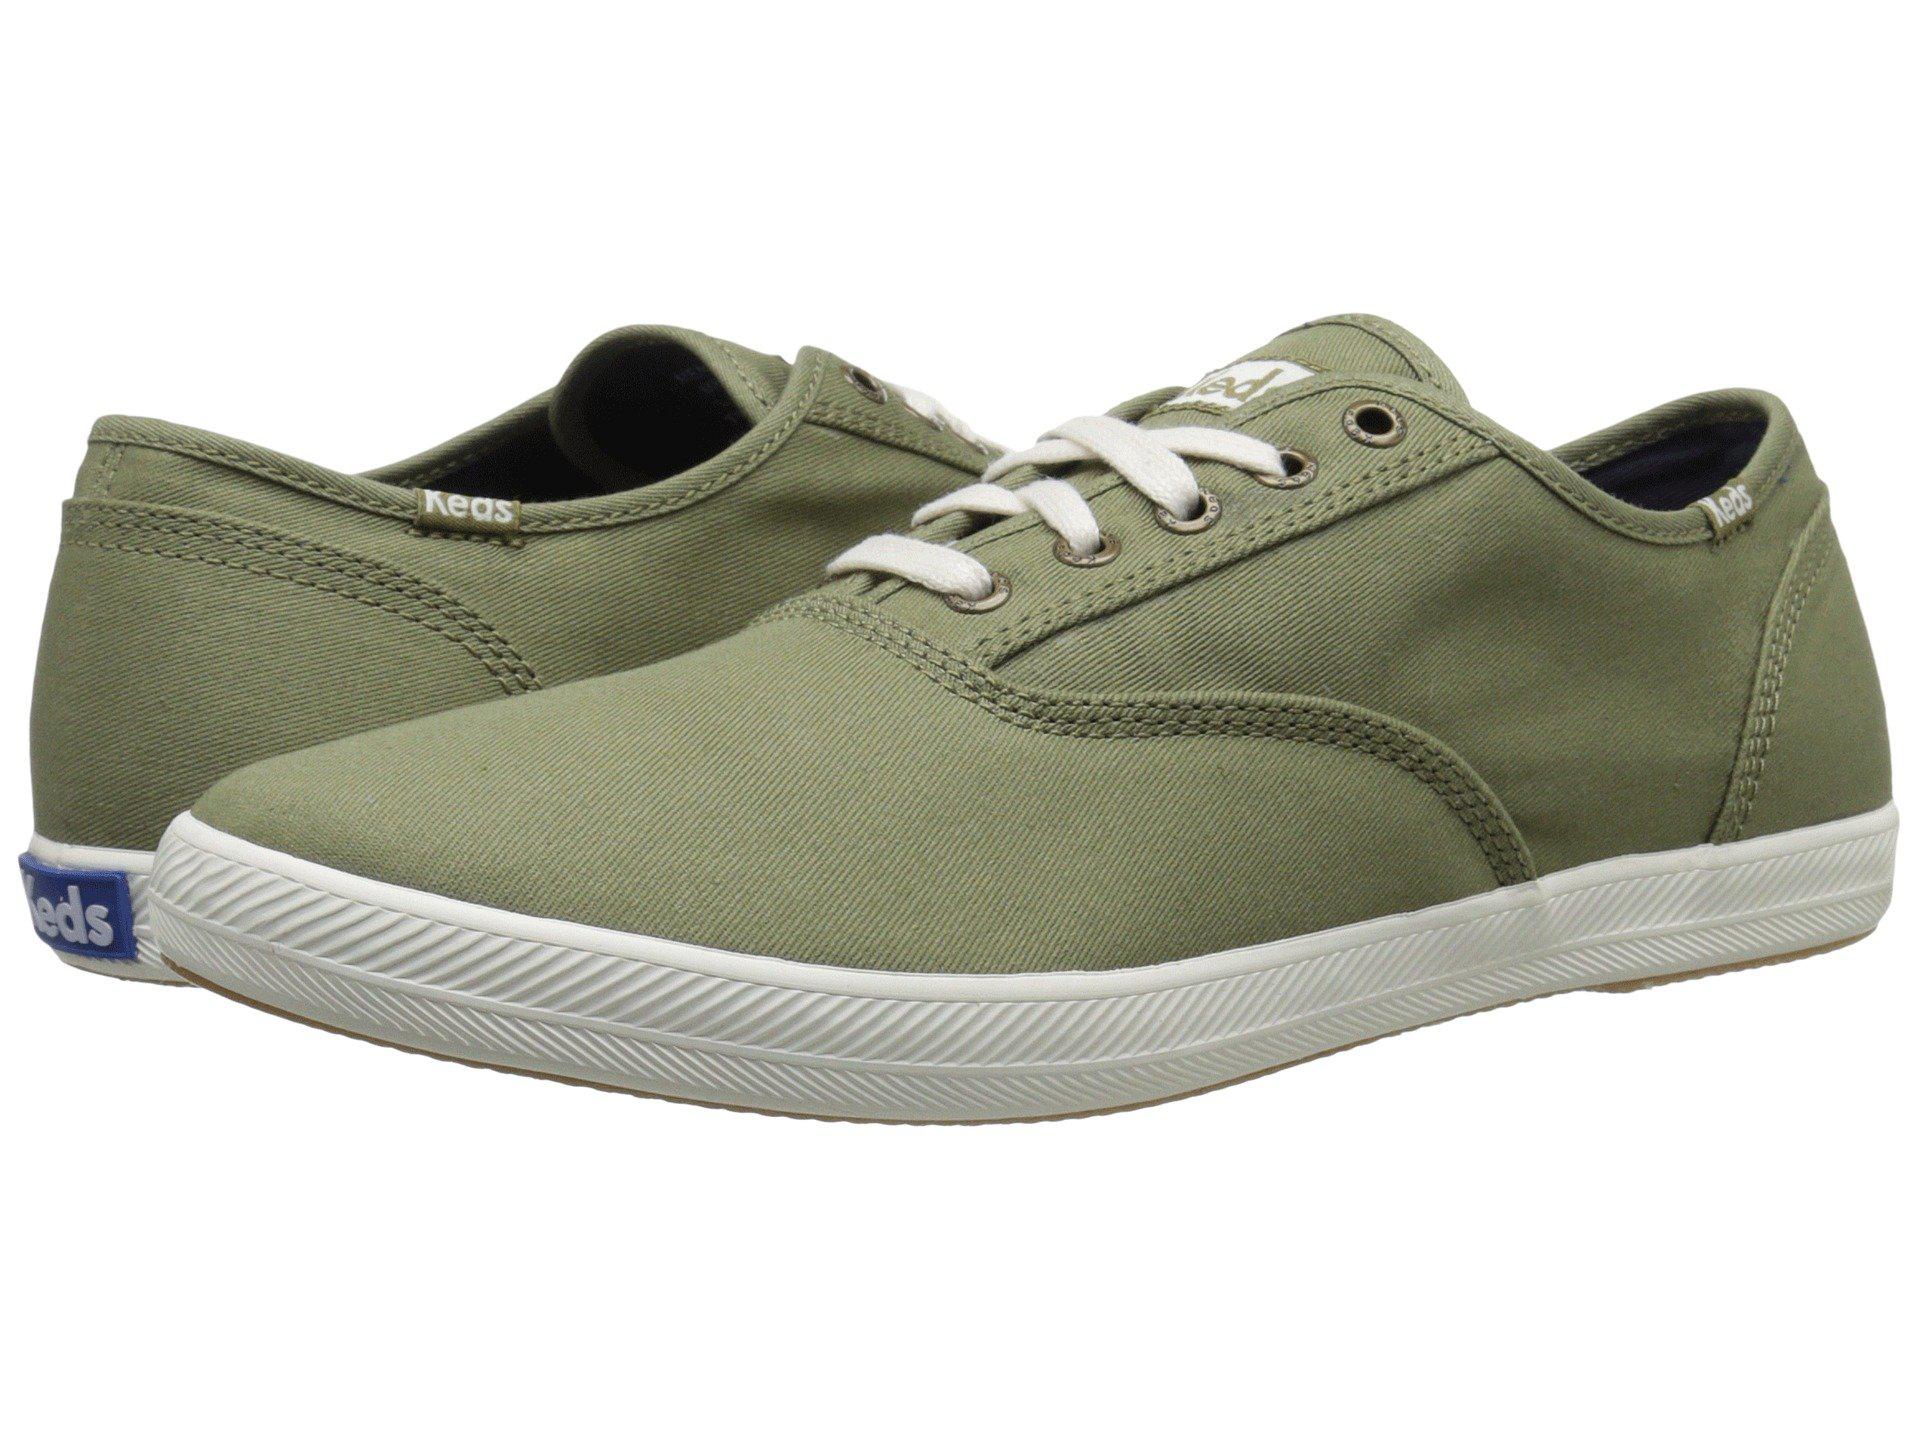 Army Twill Sneaker in Olive (Green 